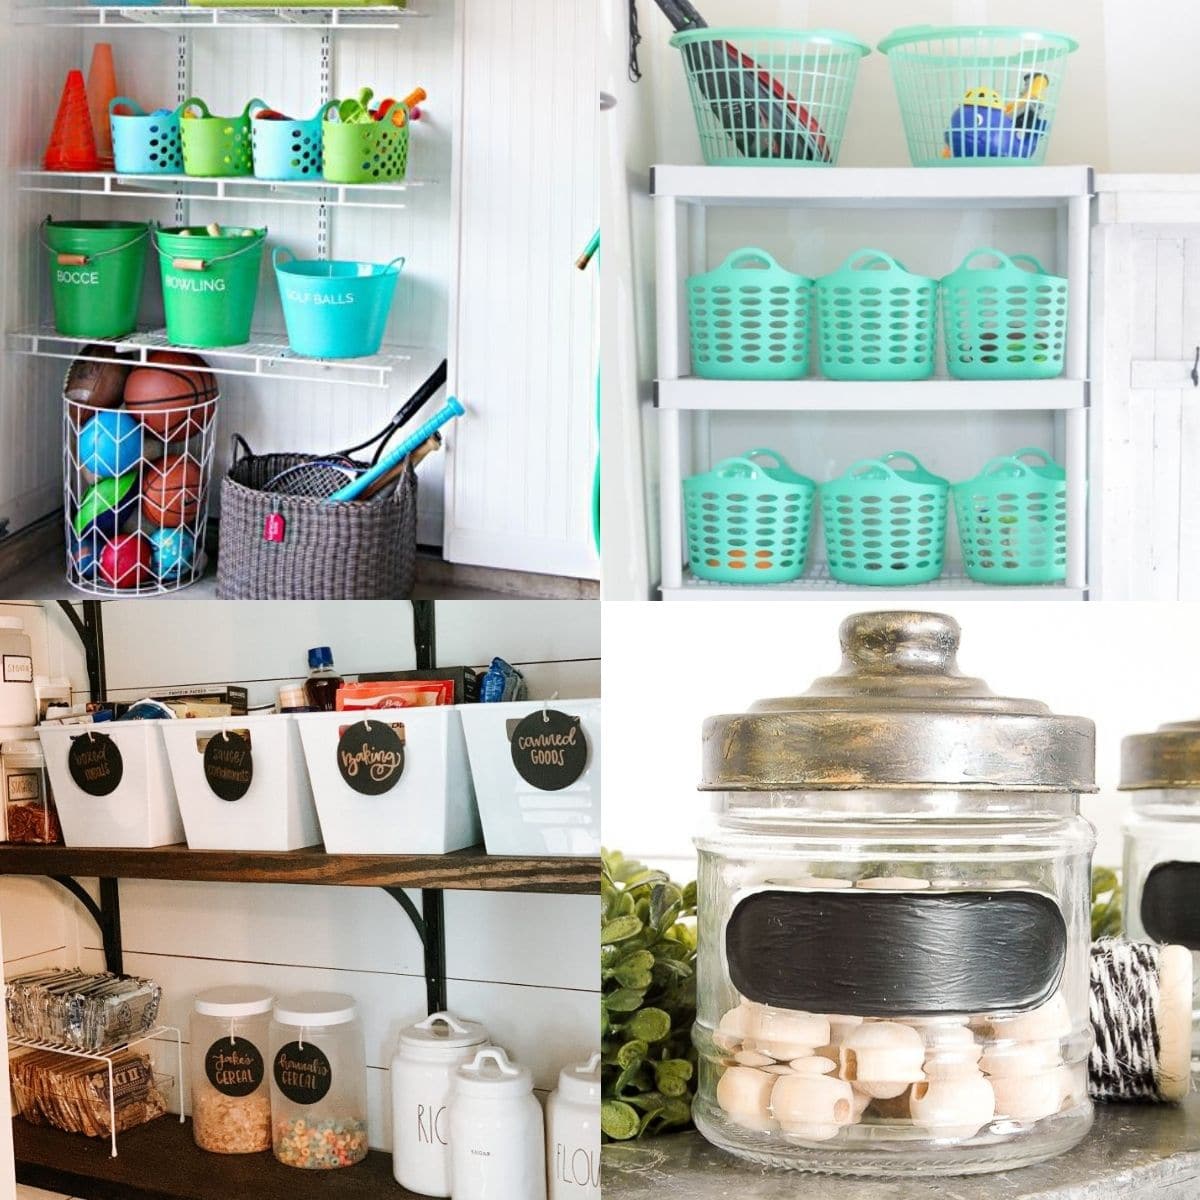 Increase storage with these Dollar Tree storage hacks.

These simple organizing tips are fun, budget-friendly, and look extra cute. 😉

#Storage #StorageIdeas #DollarTree #DollarTreeStorageIdeas

 LocalInfoForYou.com/270506/dollar-…